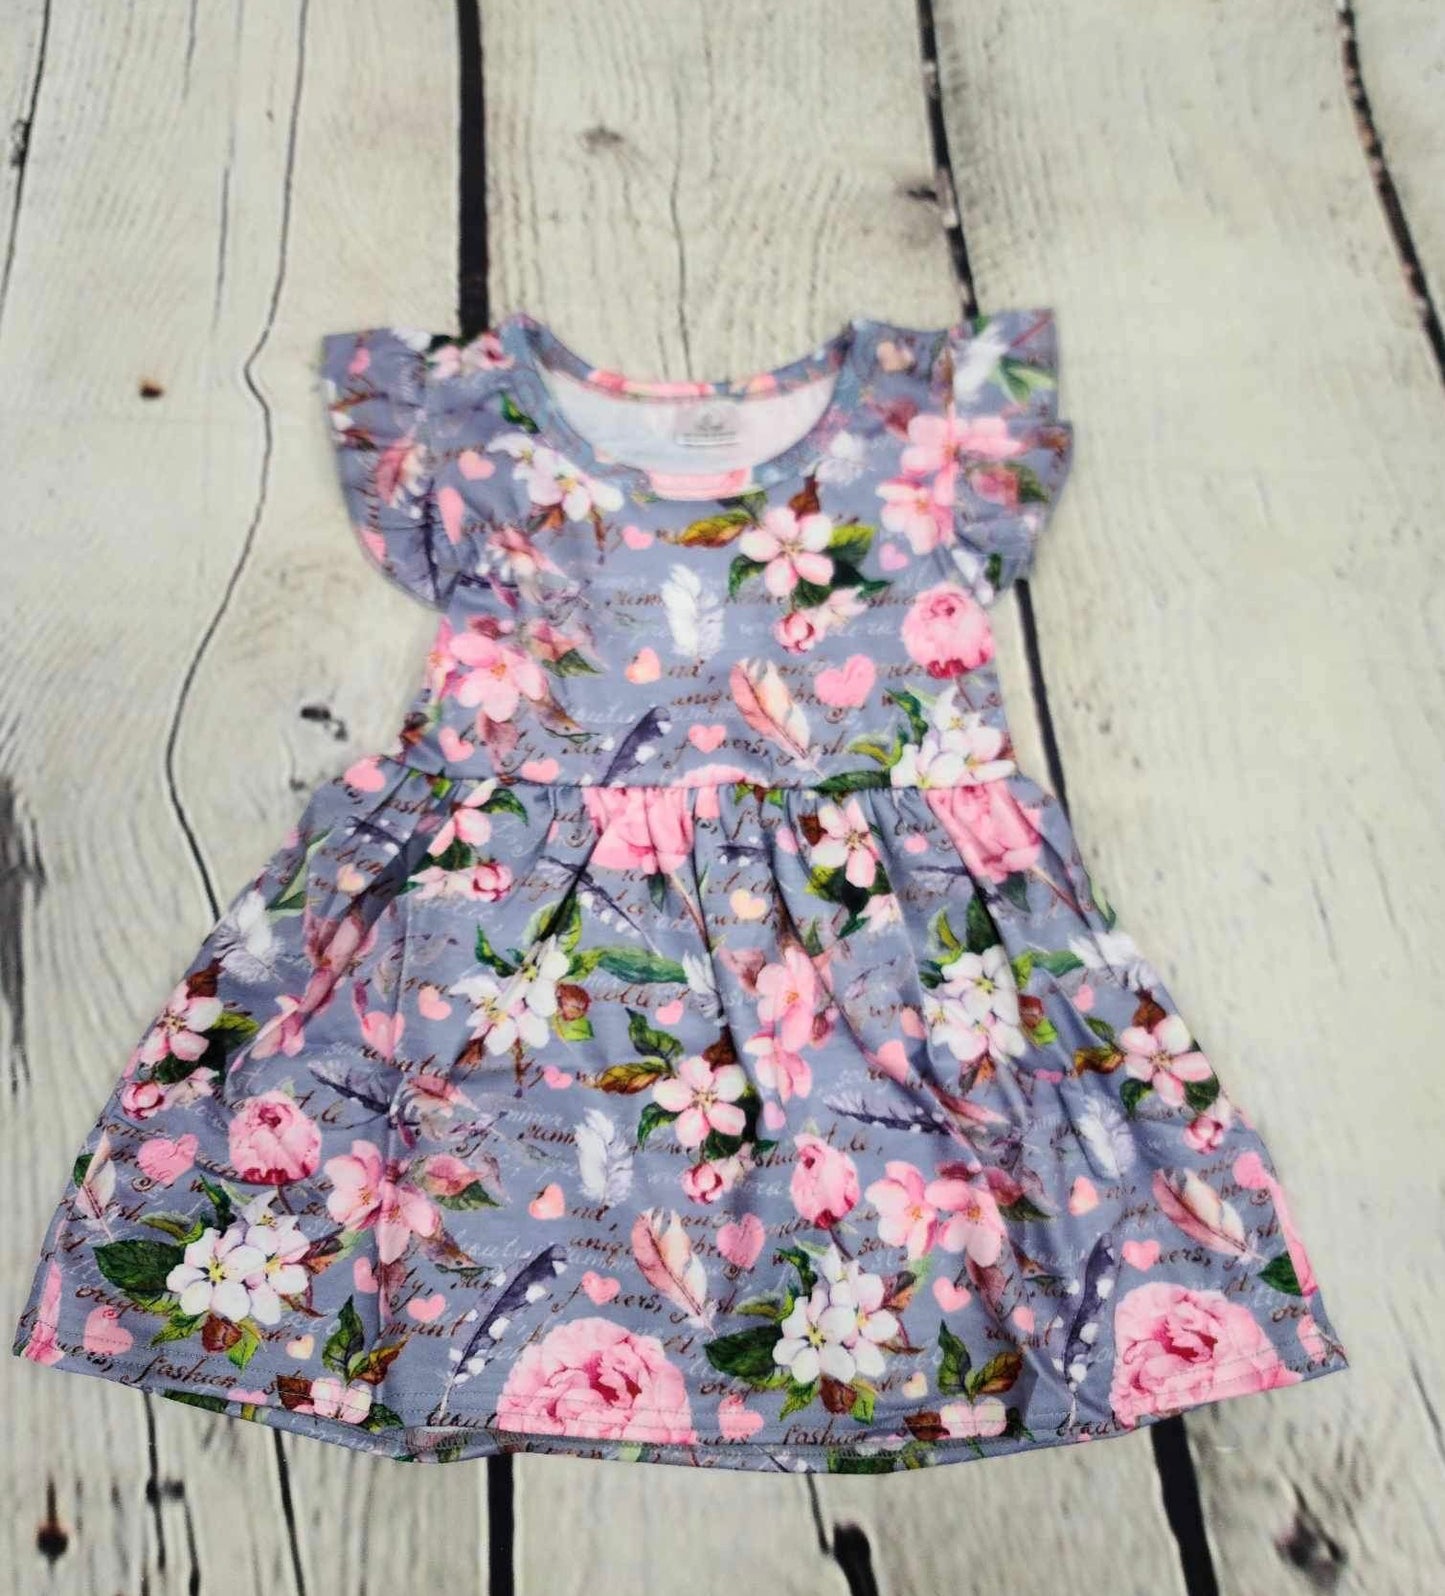 Feathers and flowers dress